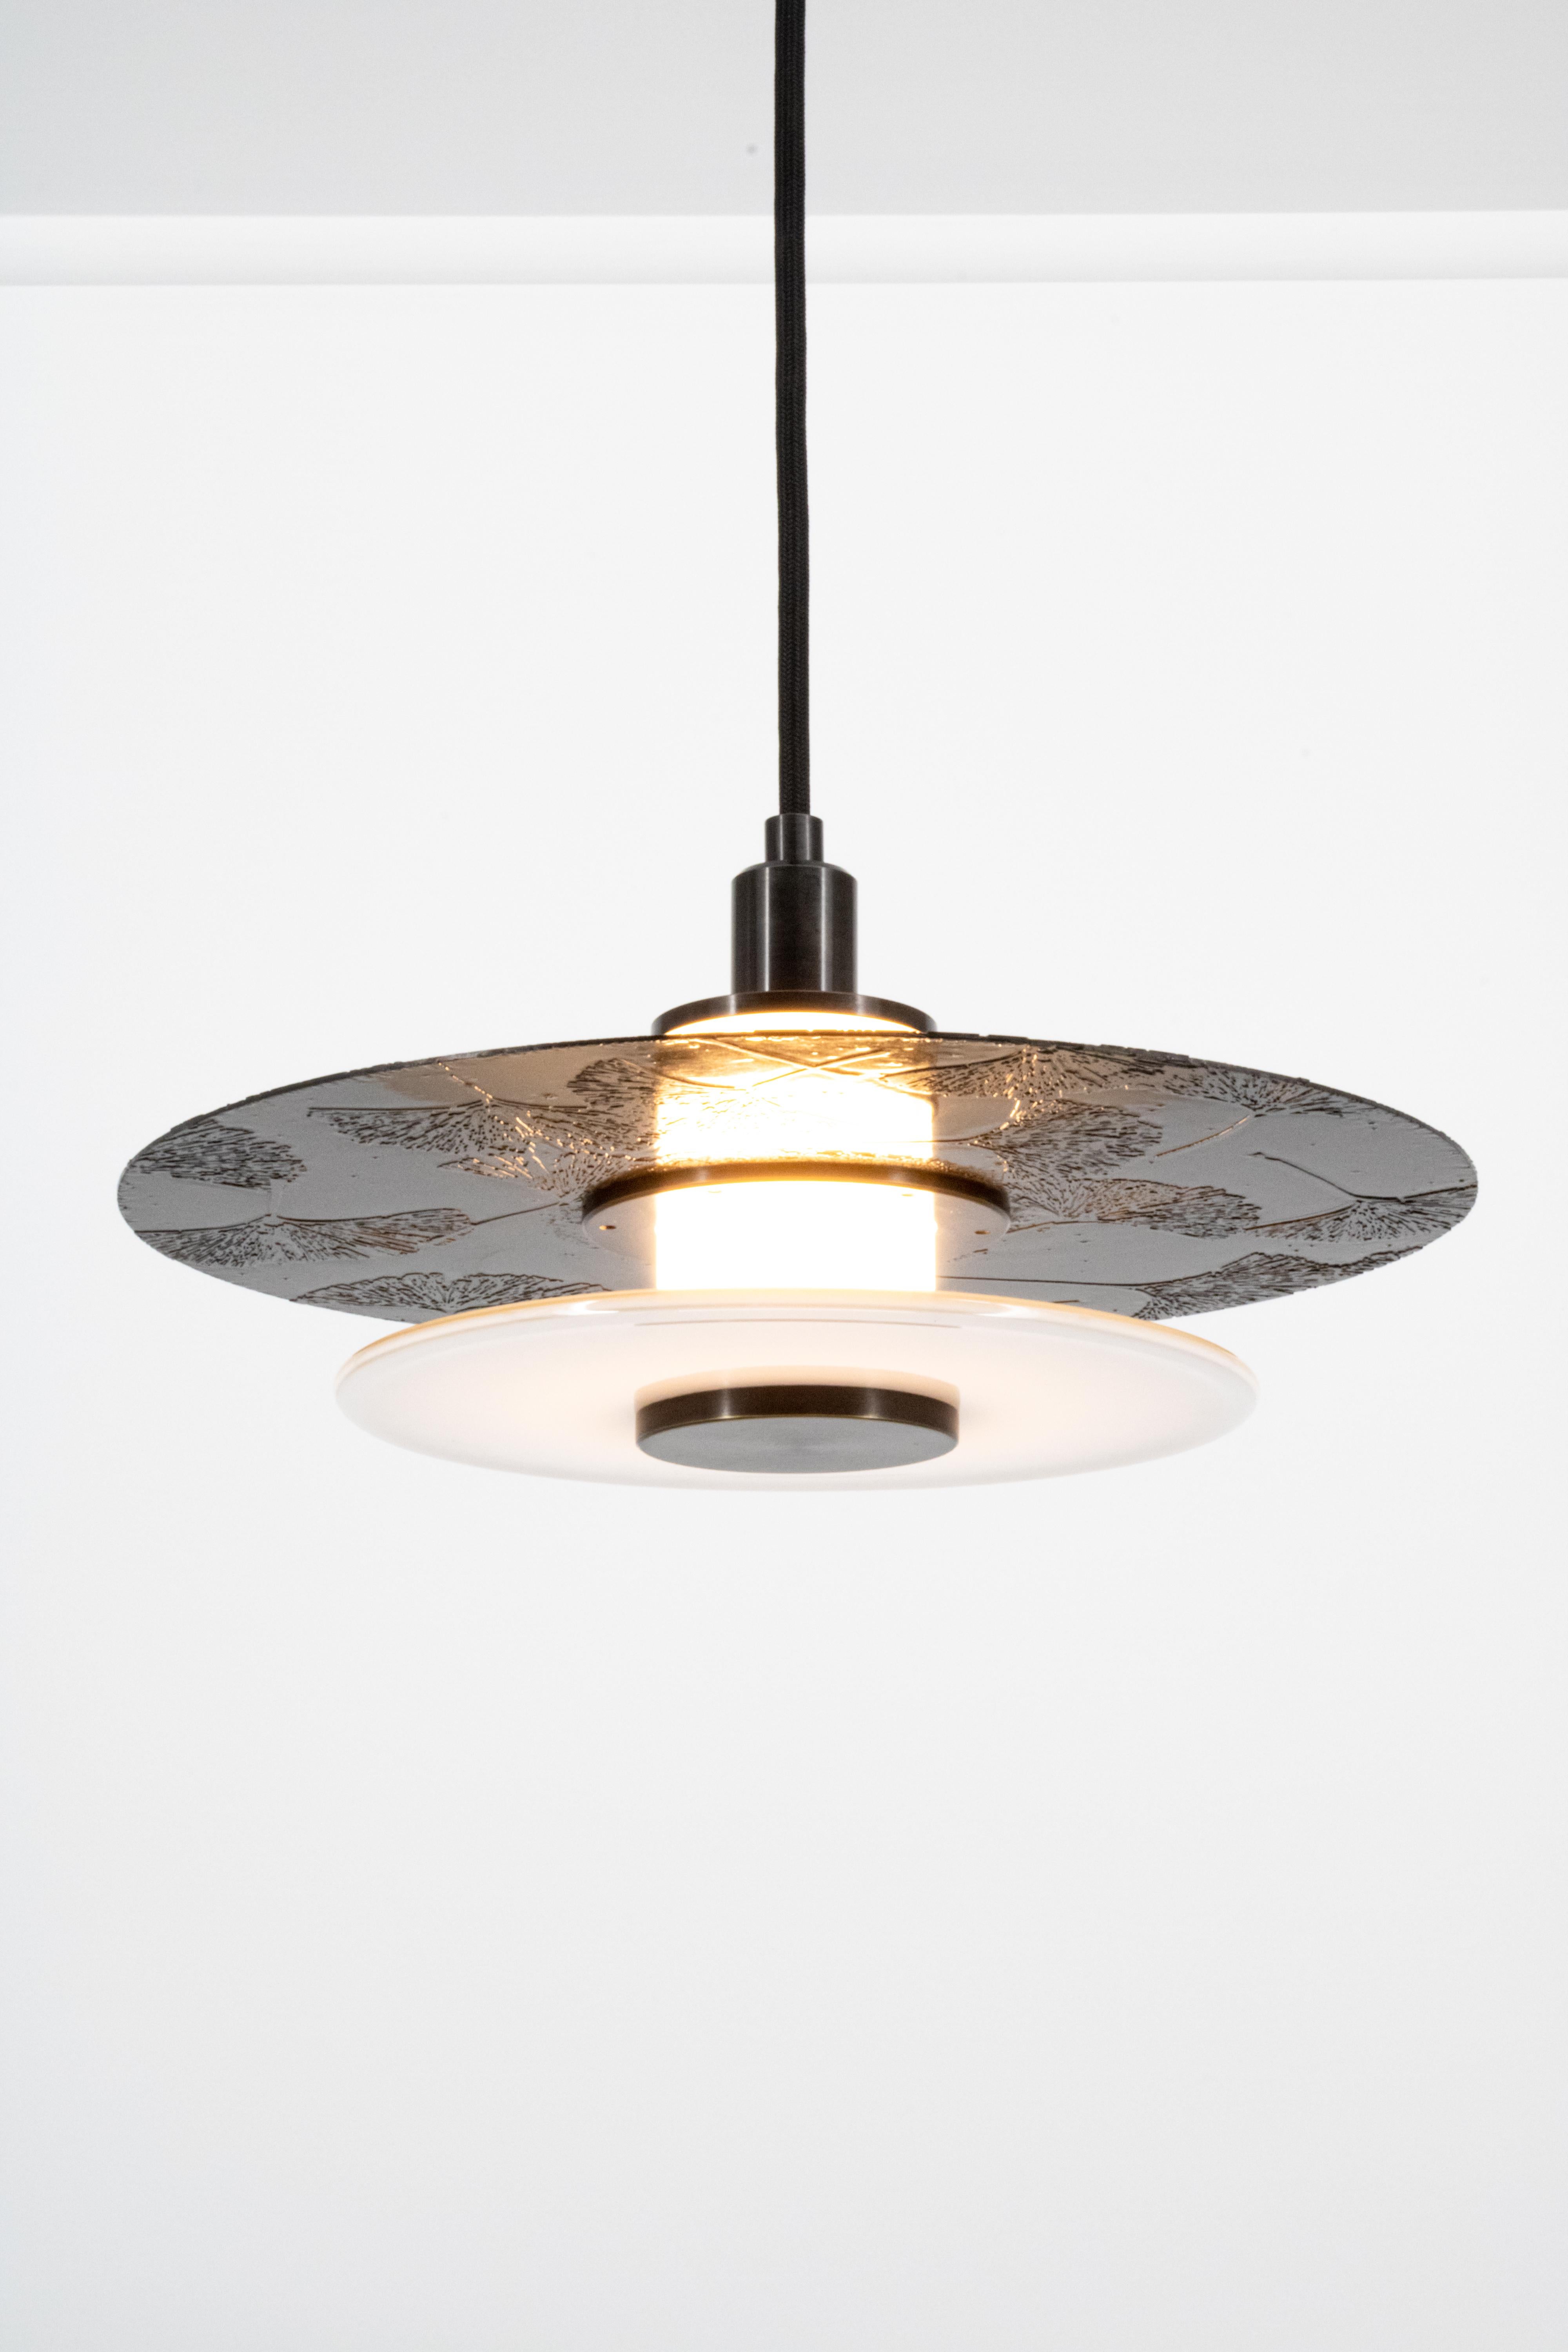 Klein Pendant w/ Milk Glass, Etched Ginkgo in Two Tone Blackened Brass For Sale 6